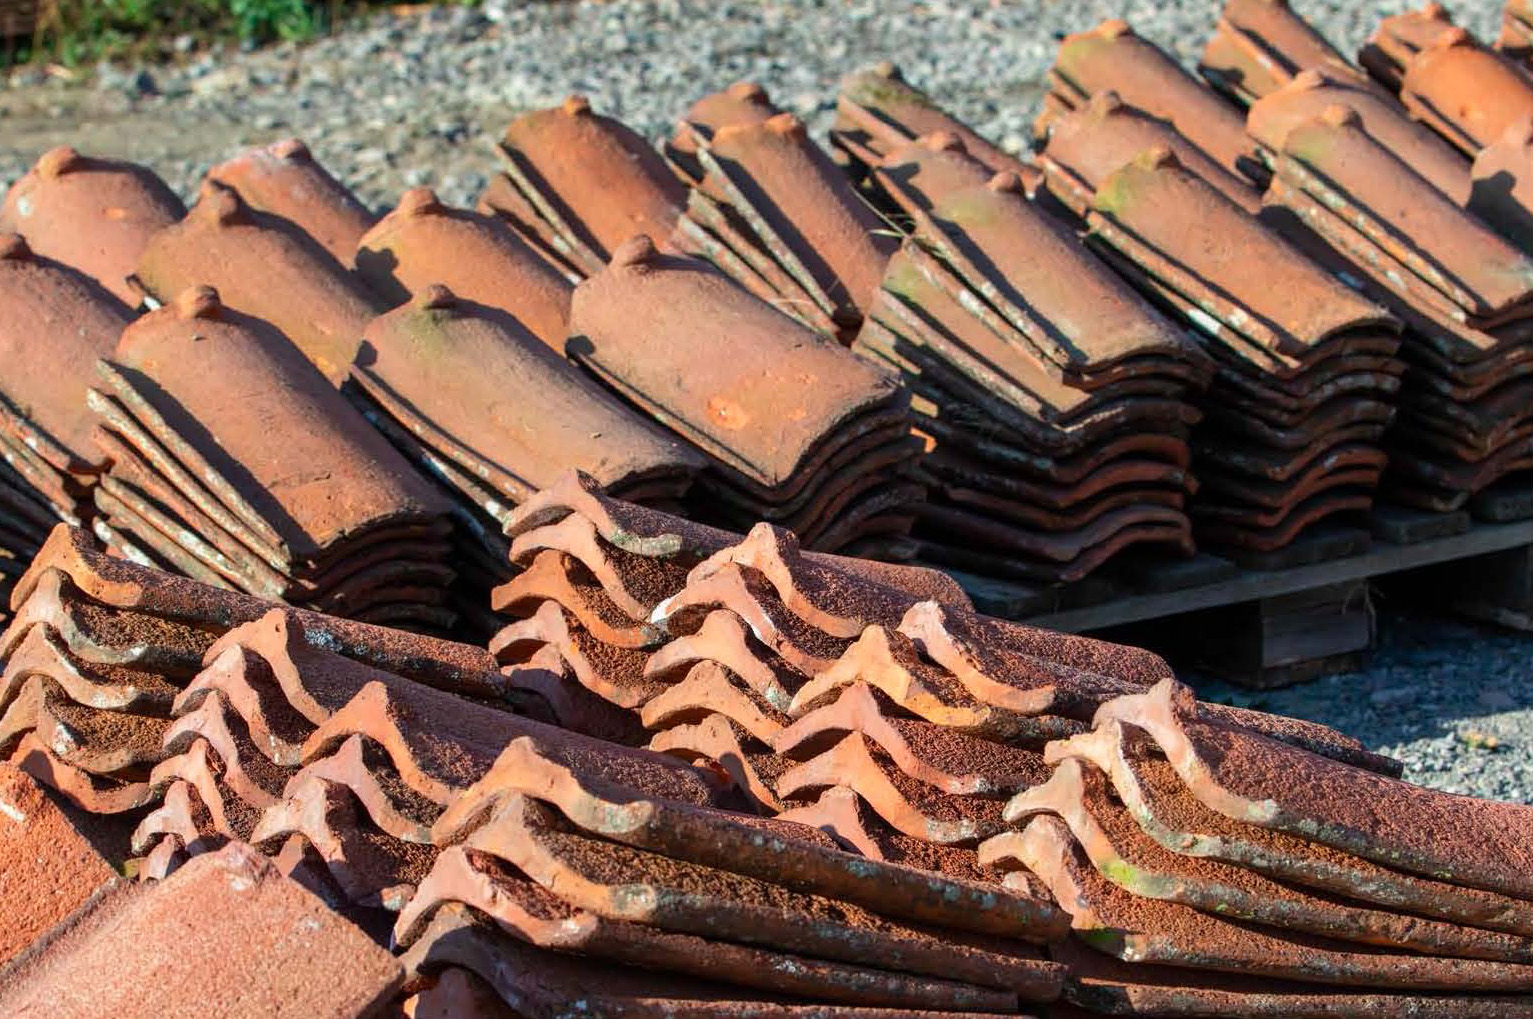 Roofing tiles for recycling